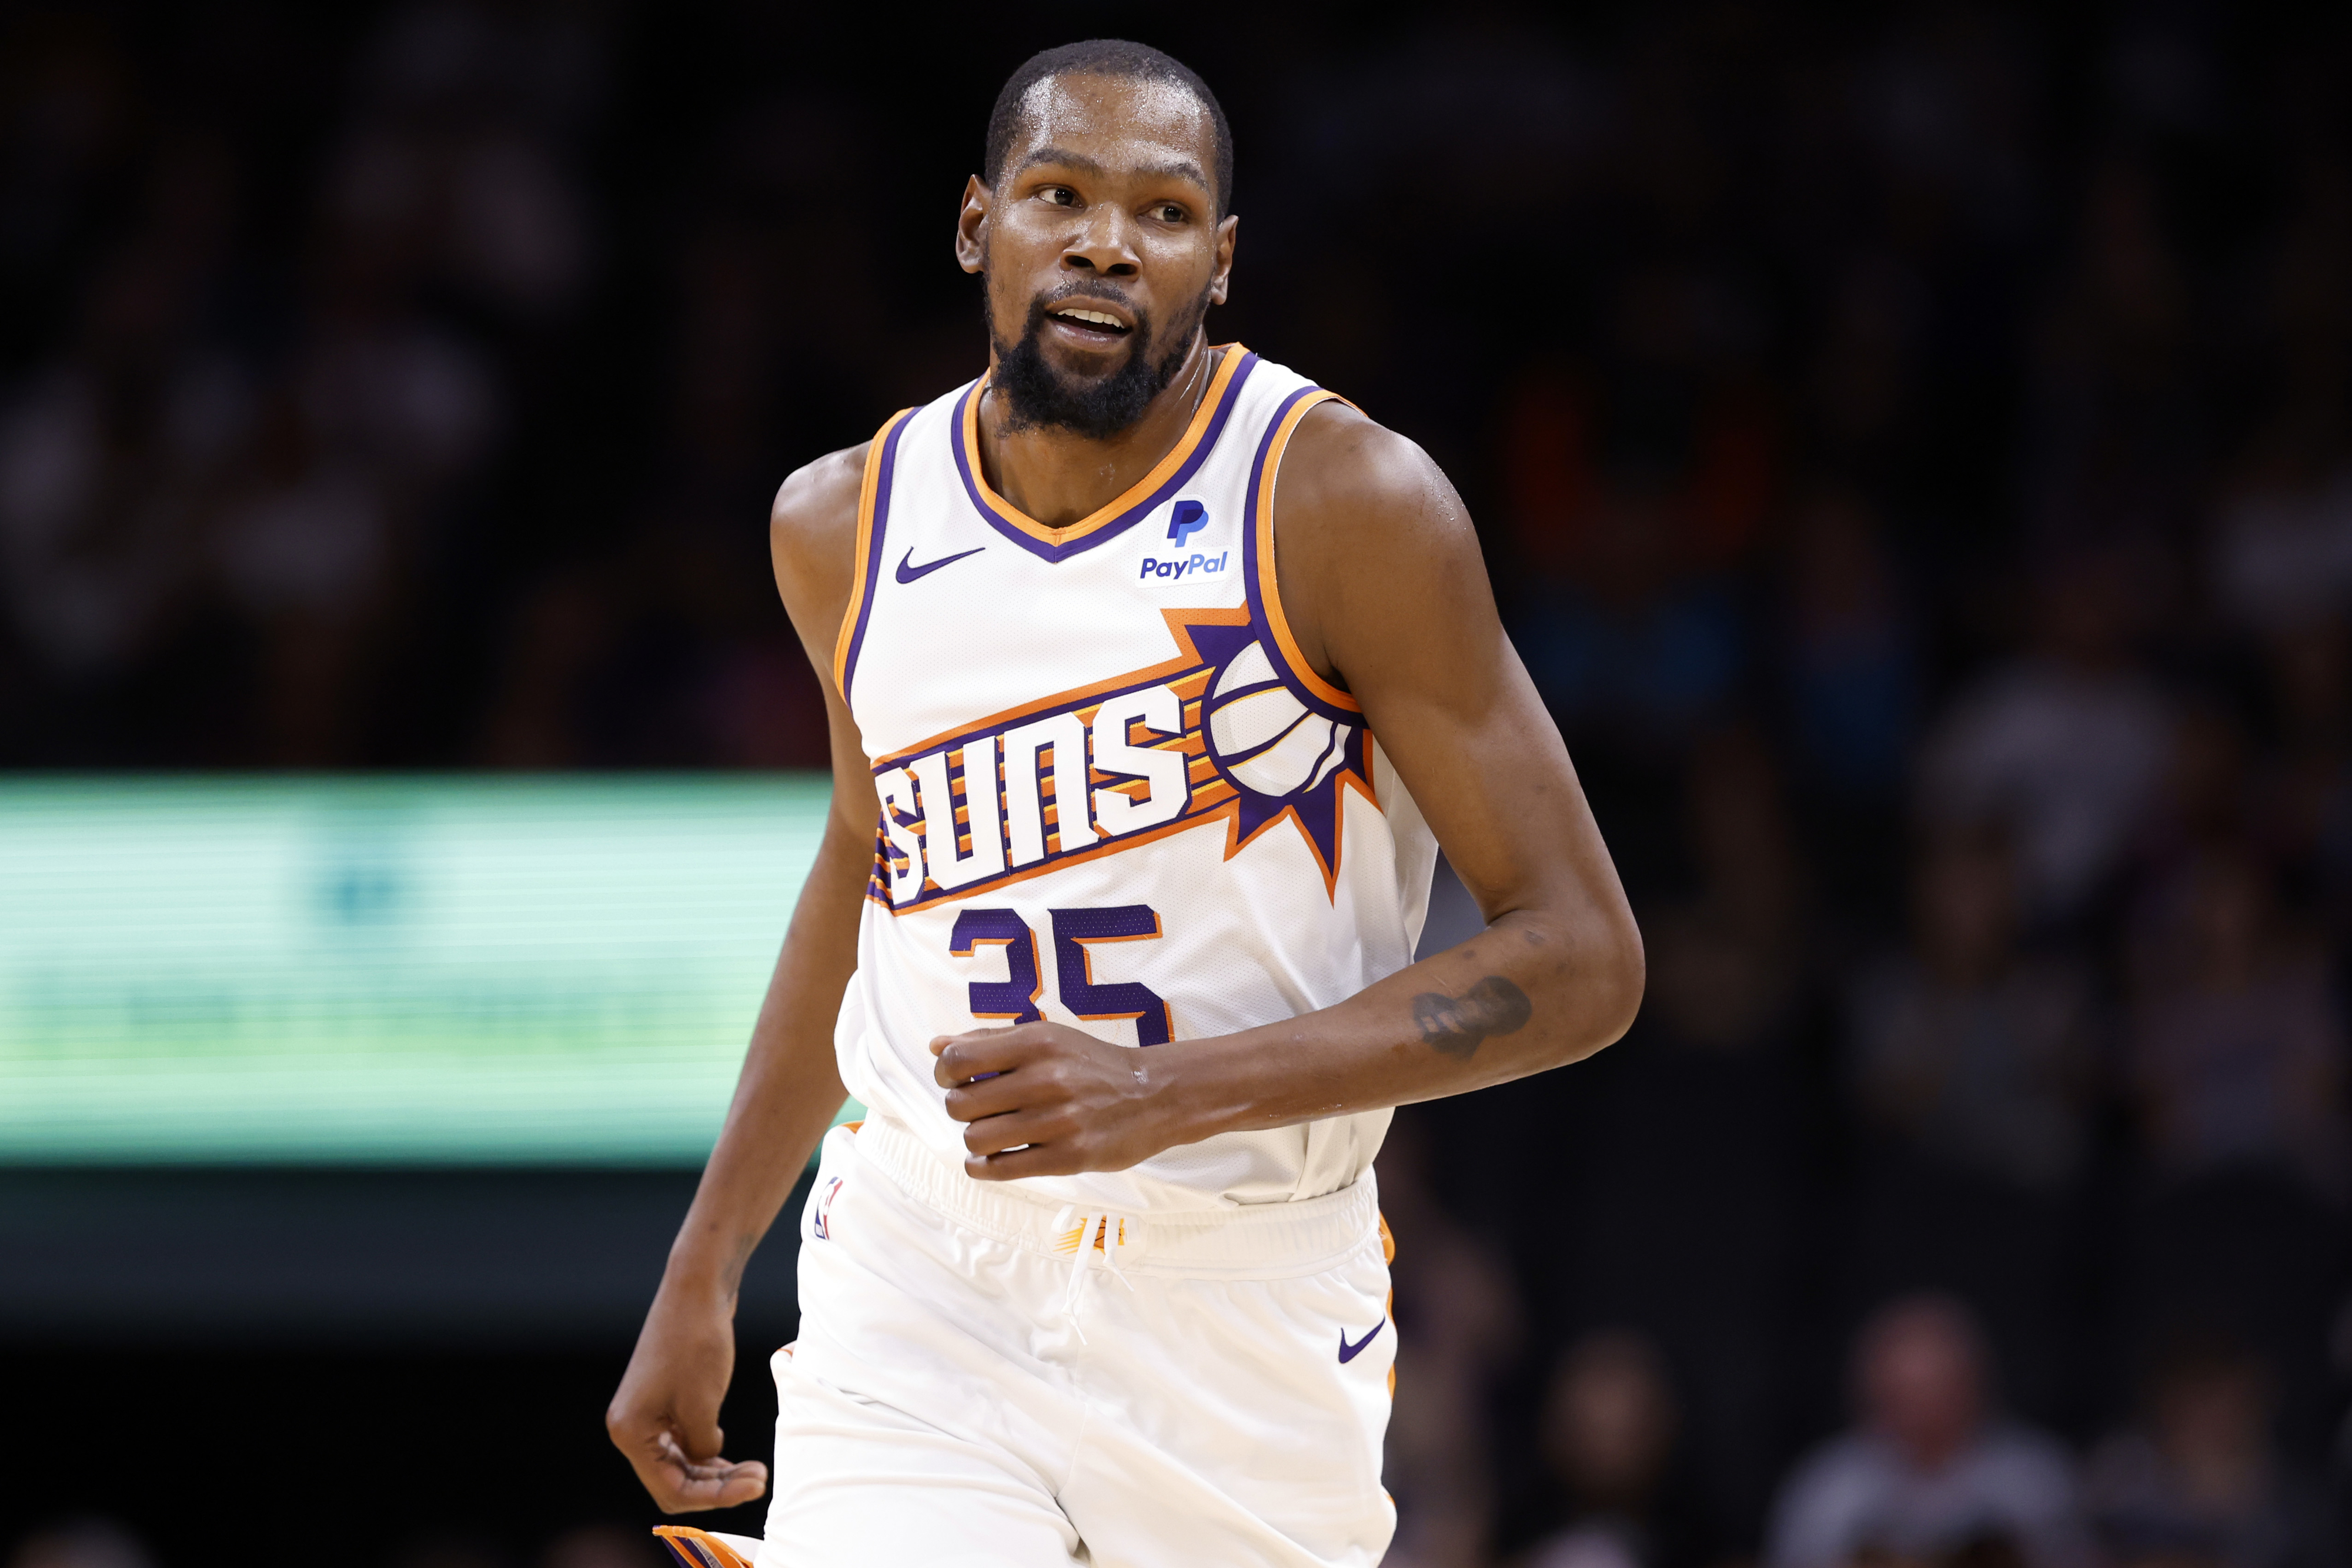 Best NBA Players 2023: The Top 10 Ranking After All-Star Game